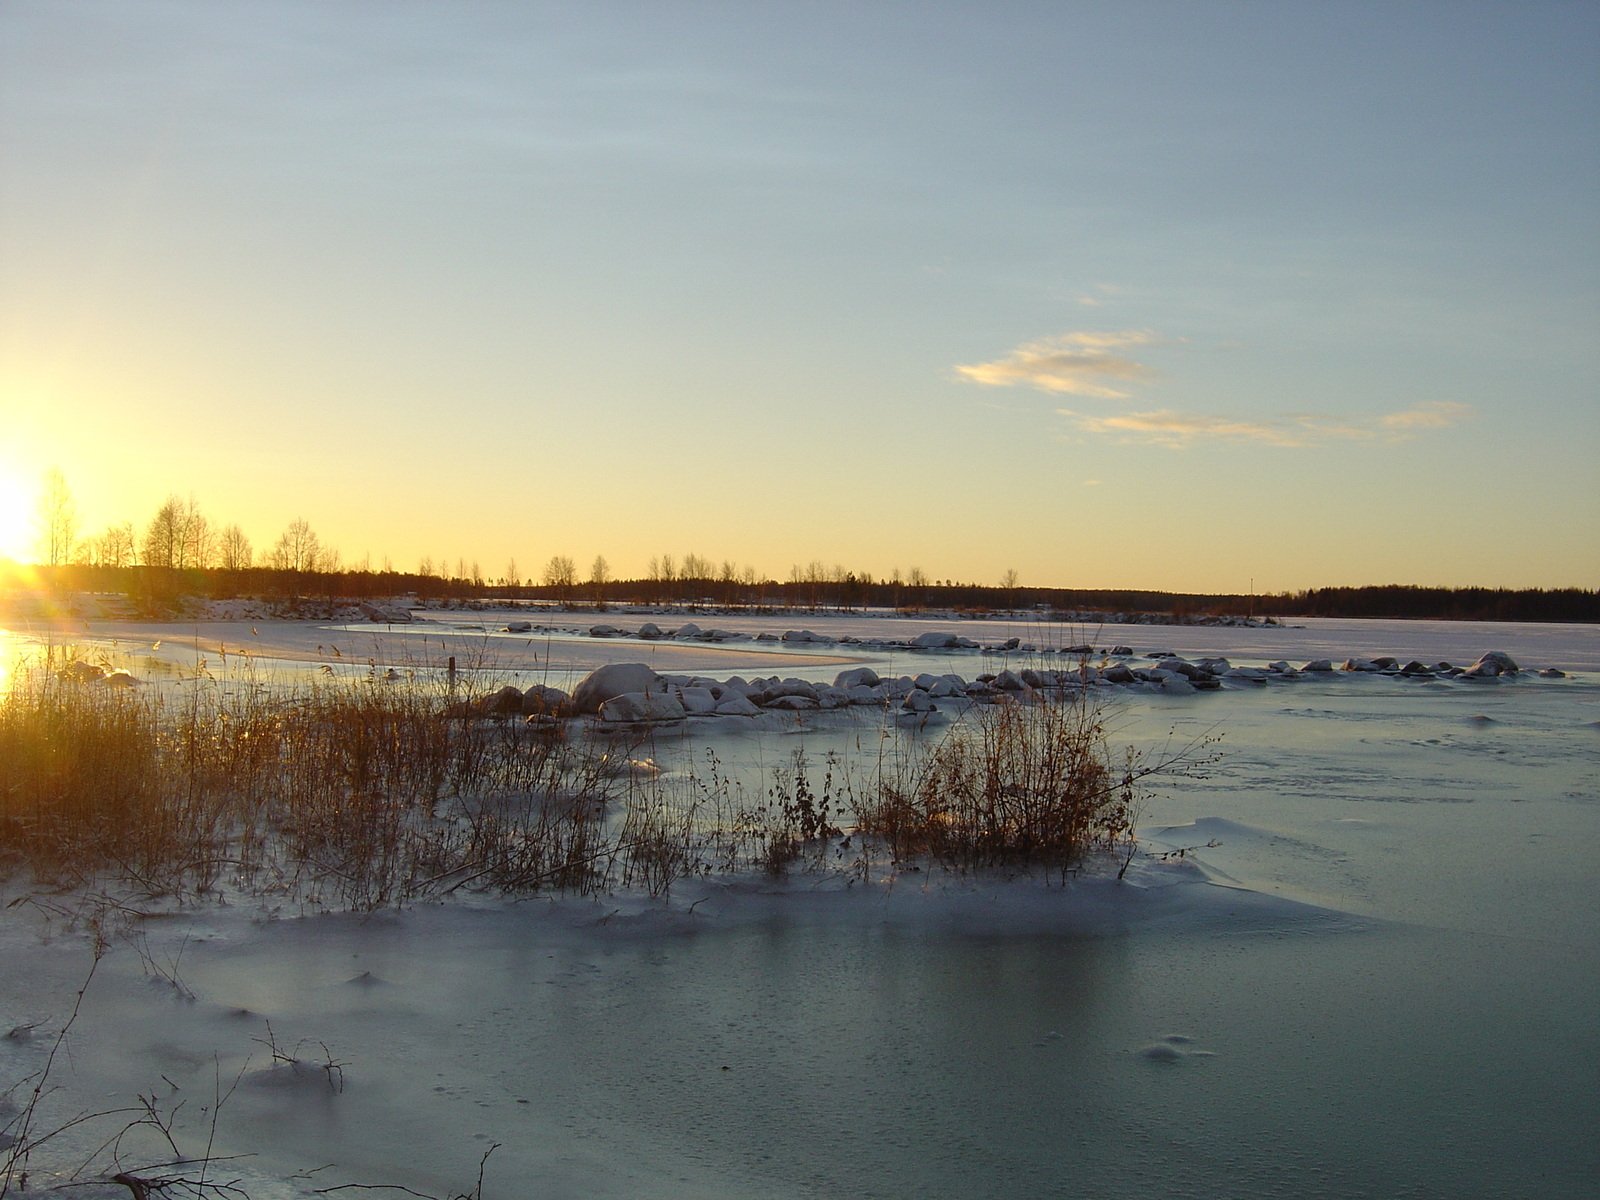 the sun is setting over an ice covered shore